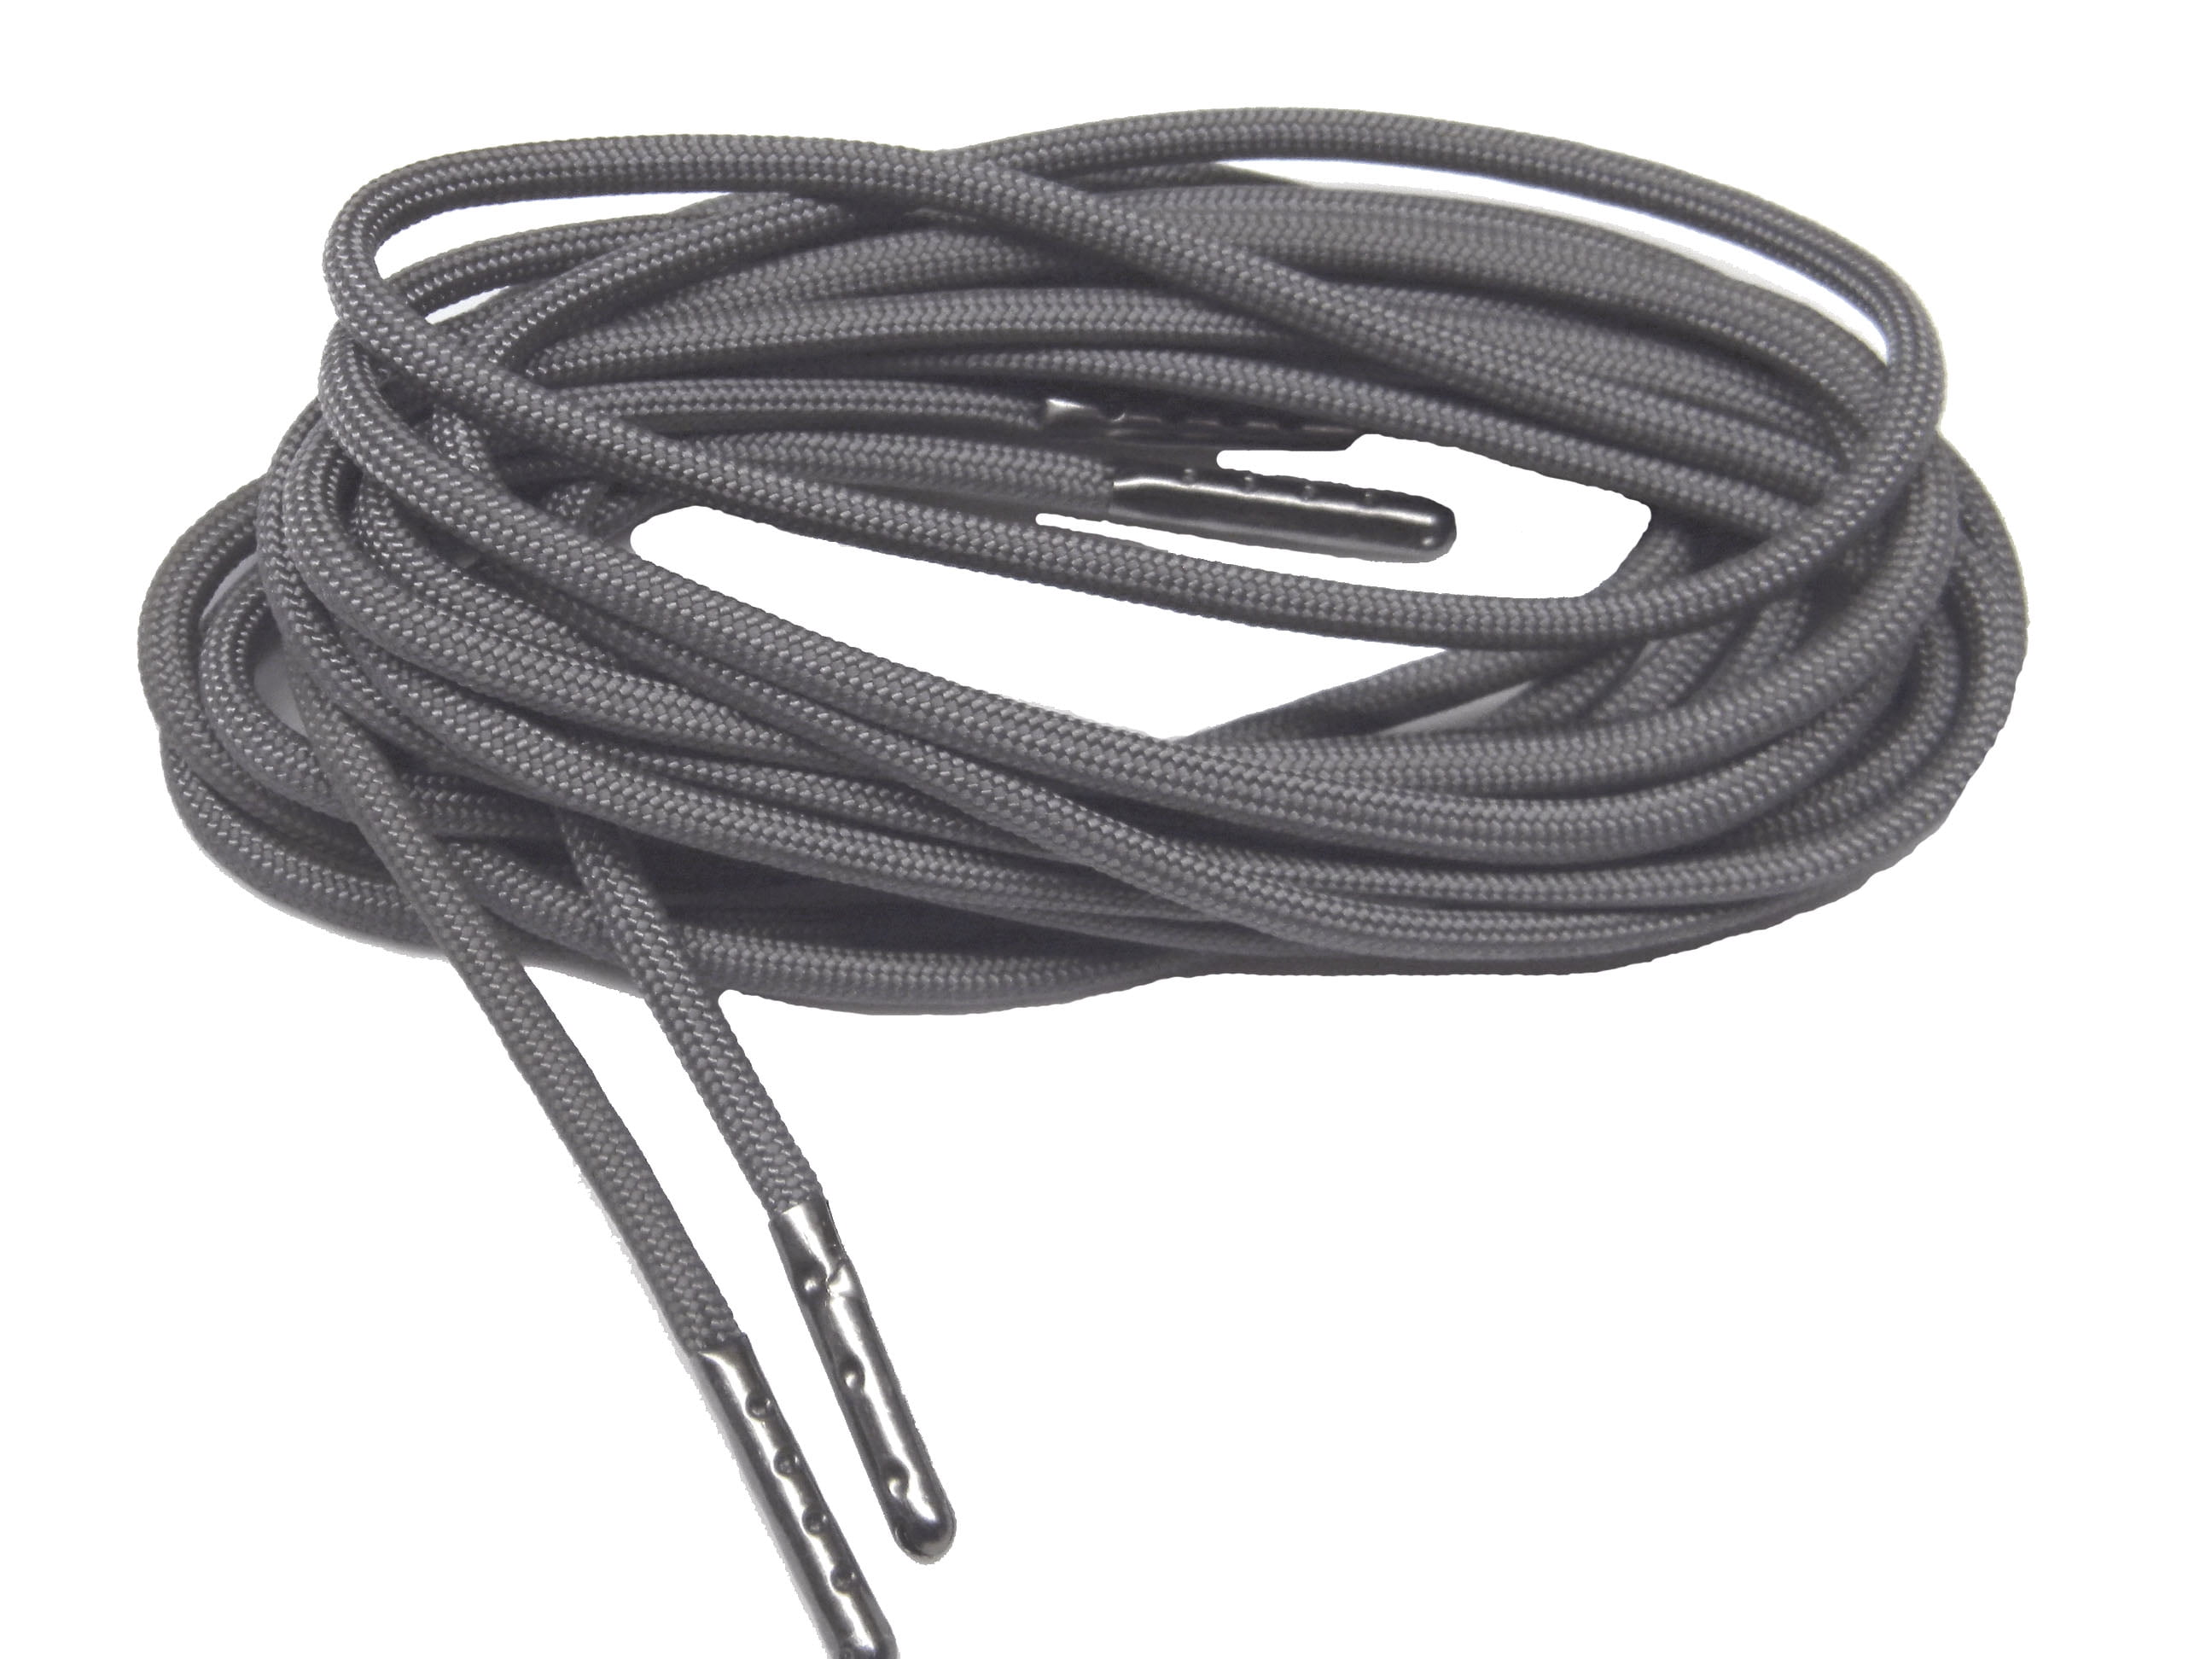 LIGHT GREY ROUND CORD SHOE LACES STRONG THICK ROPE LACE PAIR SPORT TRAINER BOOT 